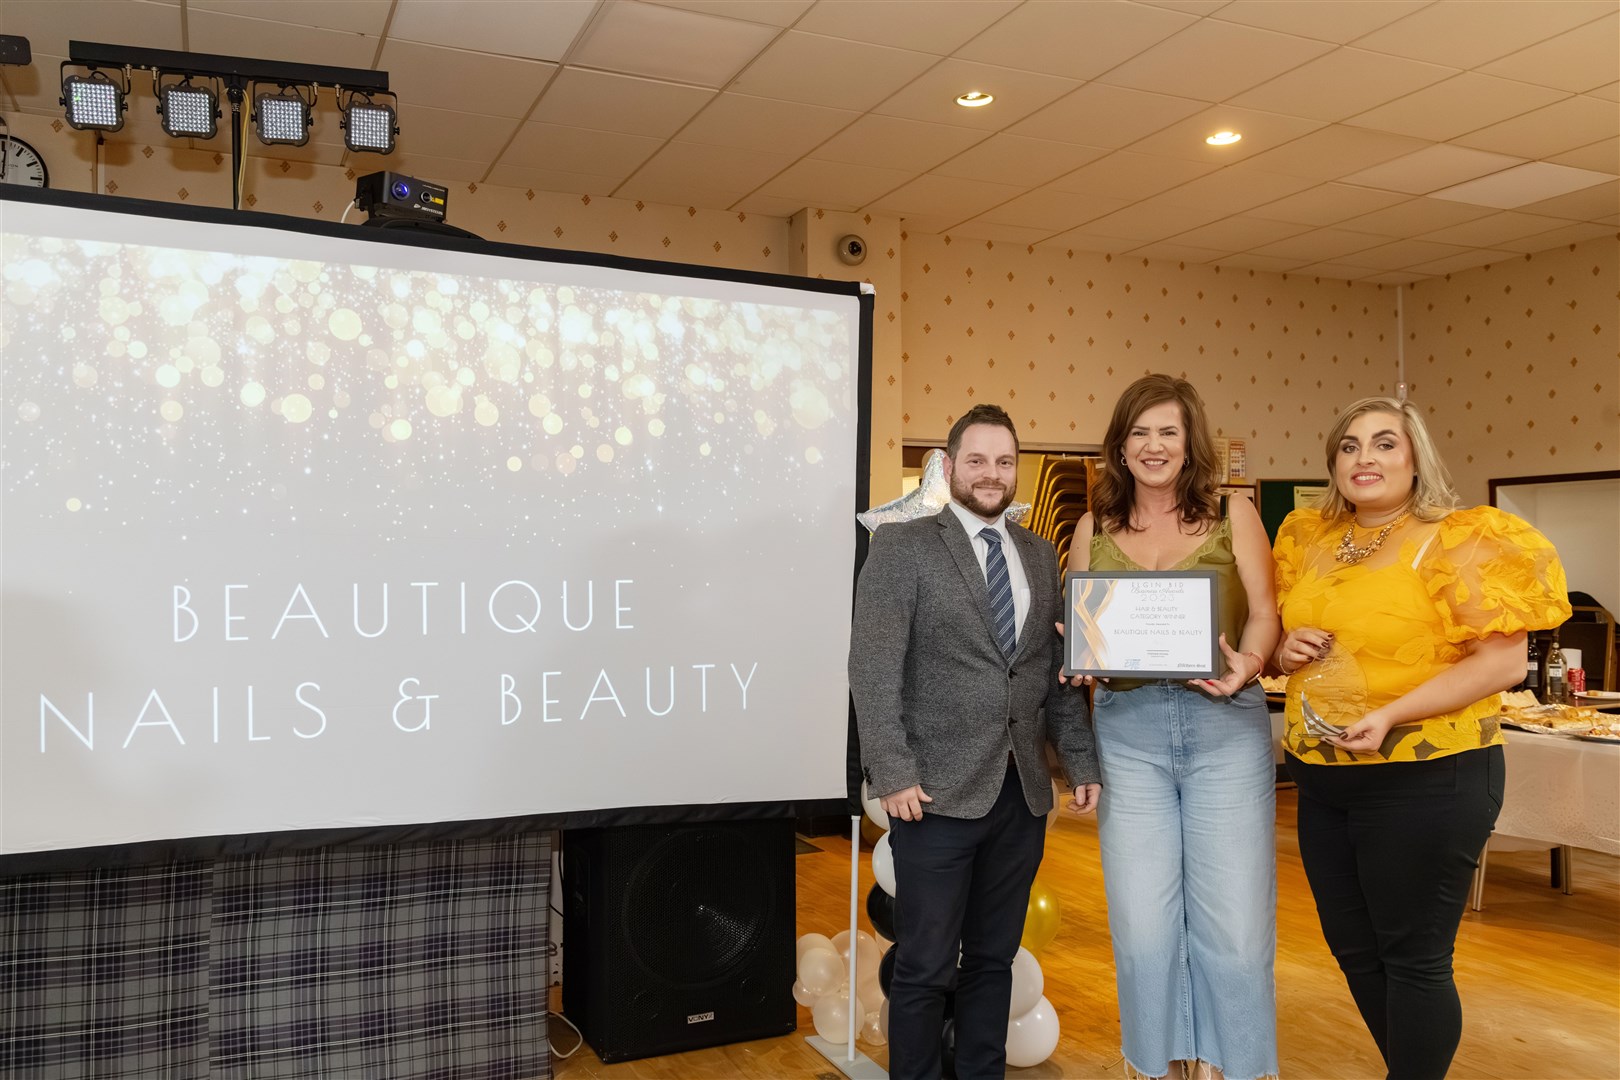 Darren MacDonald presenting the hair and beauty category award to Marie Slater and Mia Davies of Beautique Nails & Beauty. Picture: Beth Taylor.